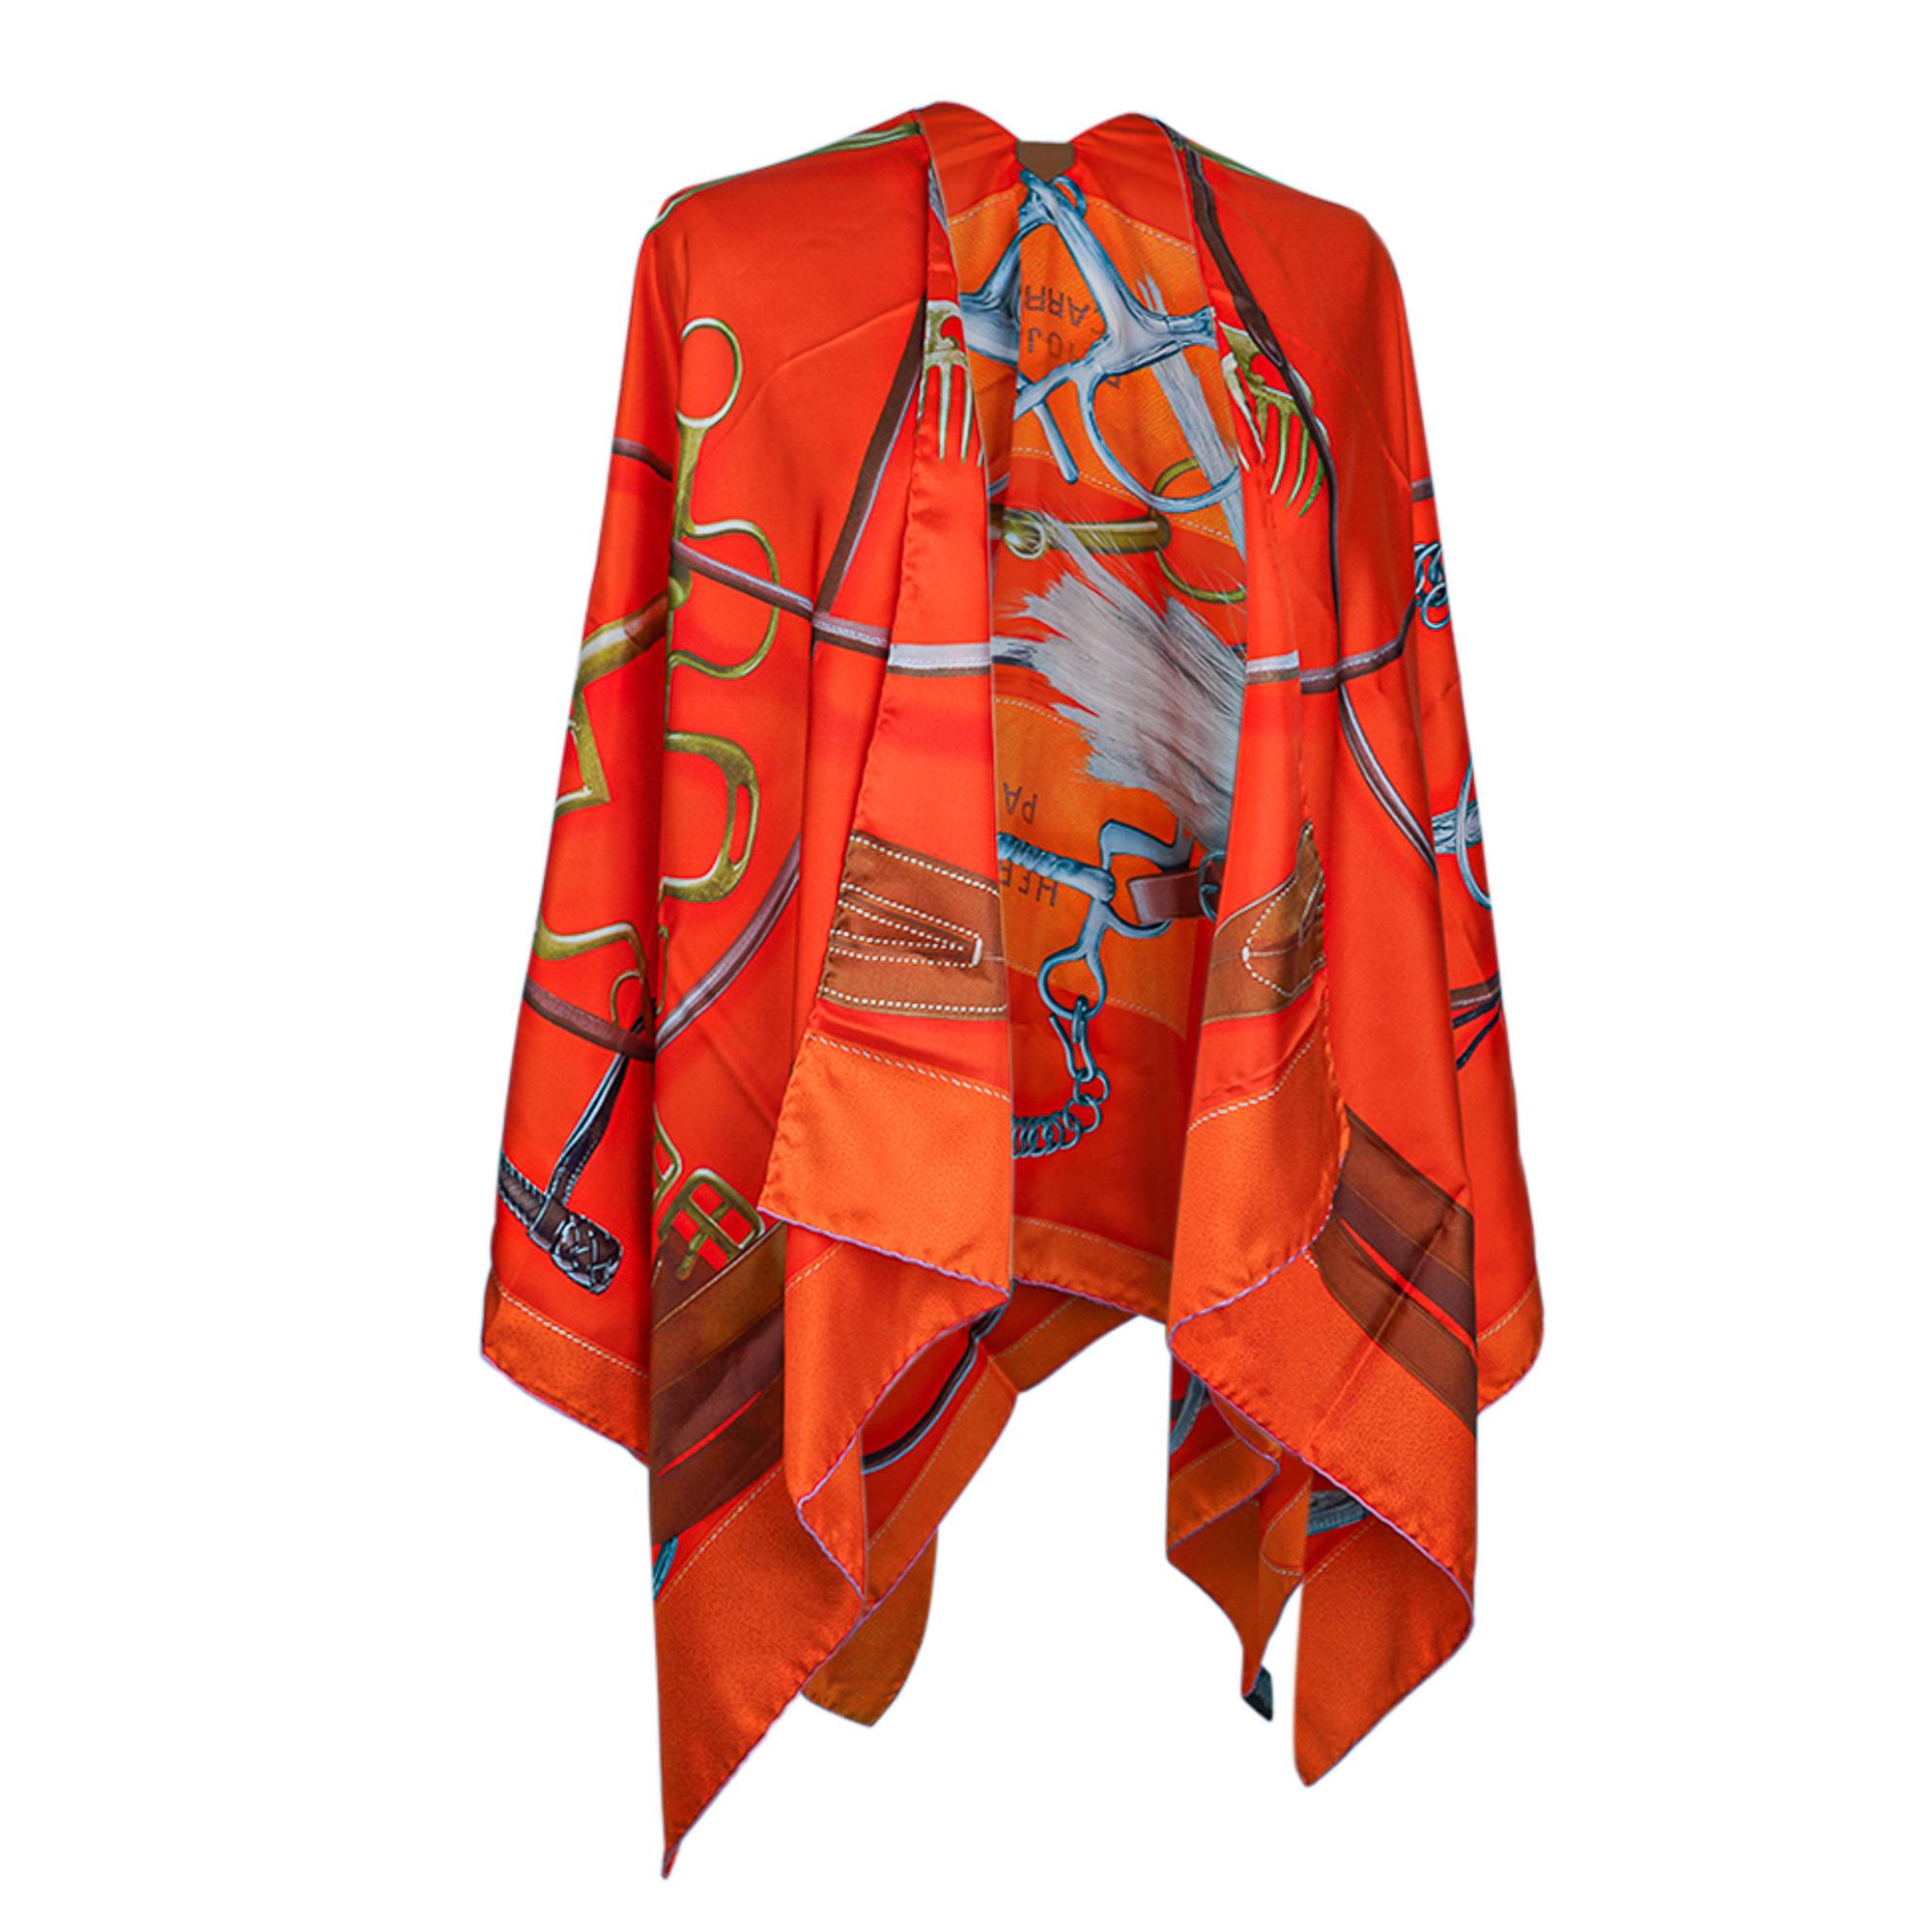 Mightychic offers an Hermes Projets Carres Poncho featured in rich Vermillion and Brun colorway.
The cutout, with lambskin leather tab, transforms this large scarf into a beautiful Poncho.
Depicts an array of elegant accessories for the horse.
Mane